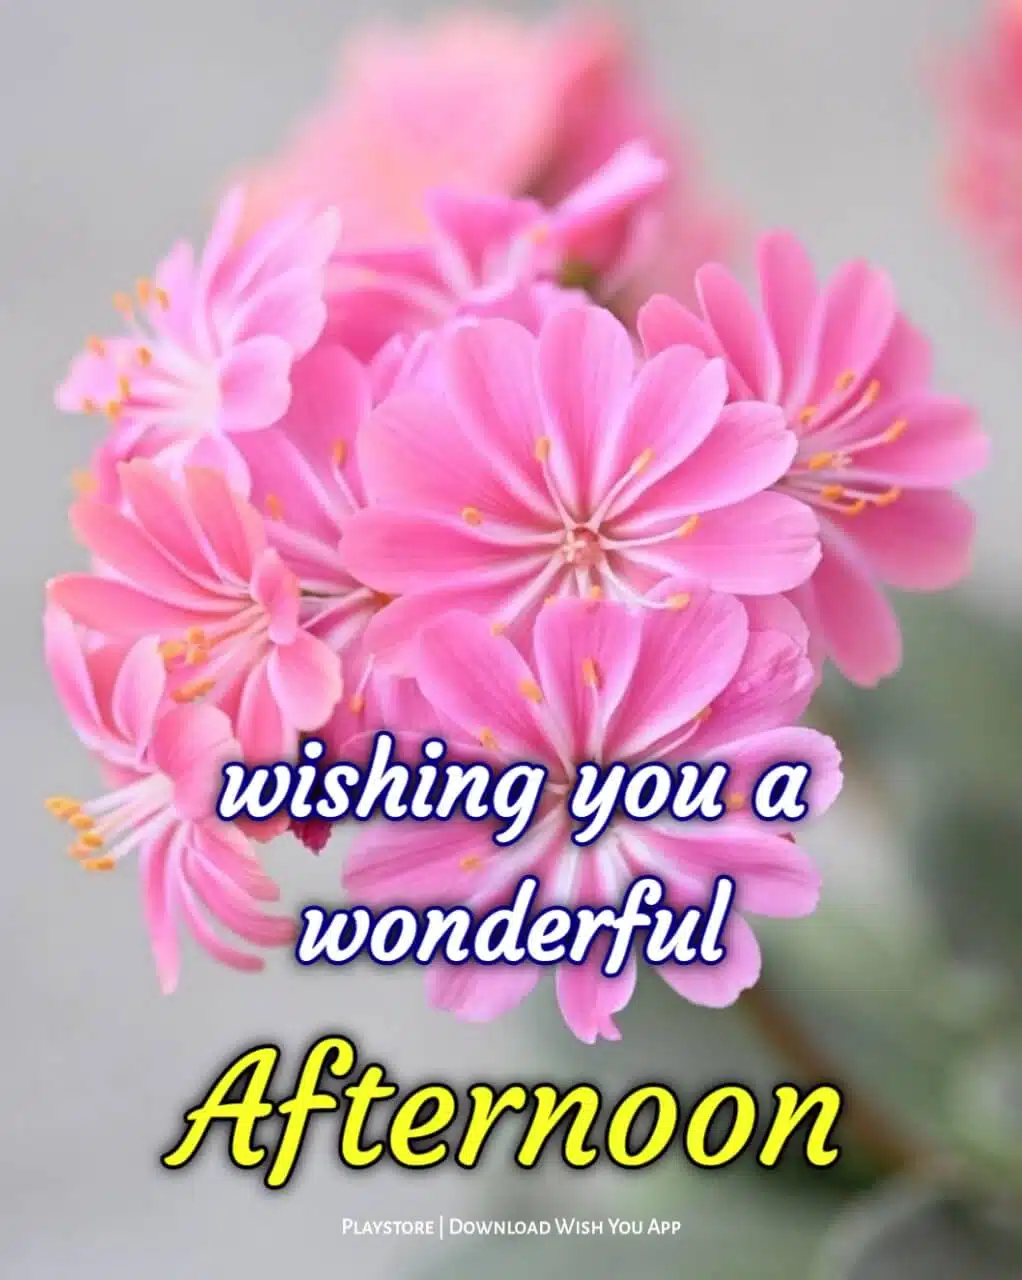 Good Afternoon Flowers Images